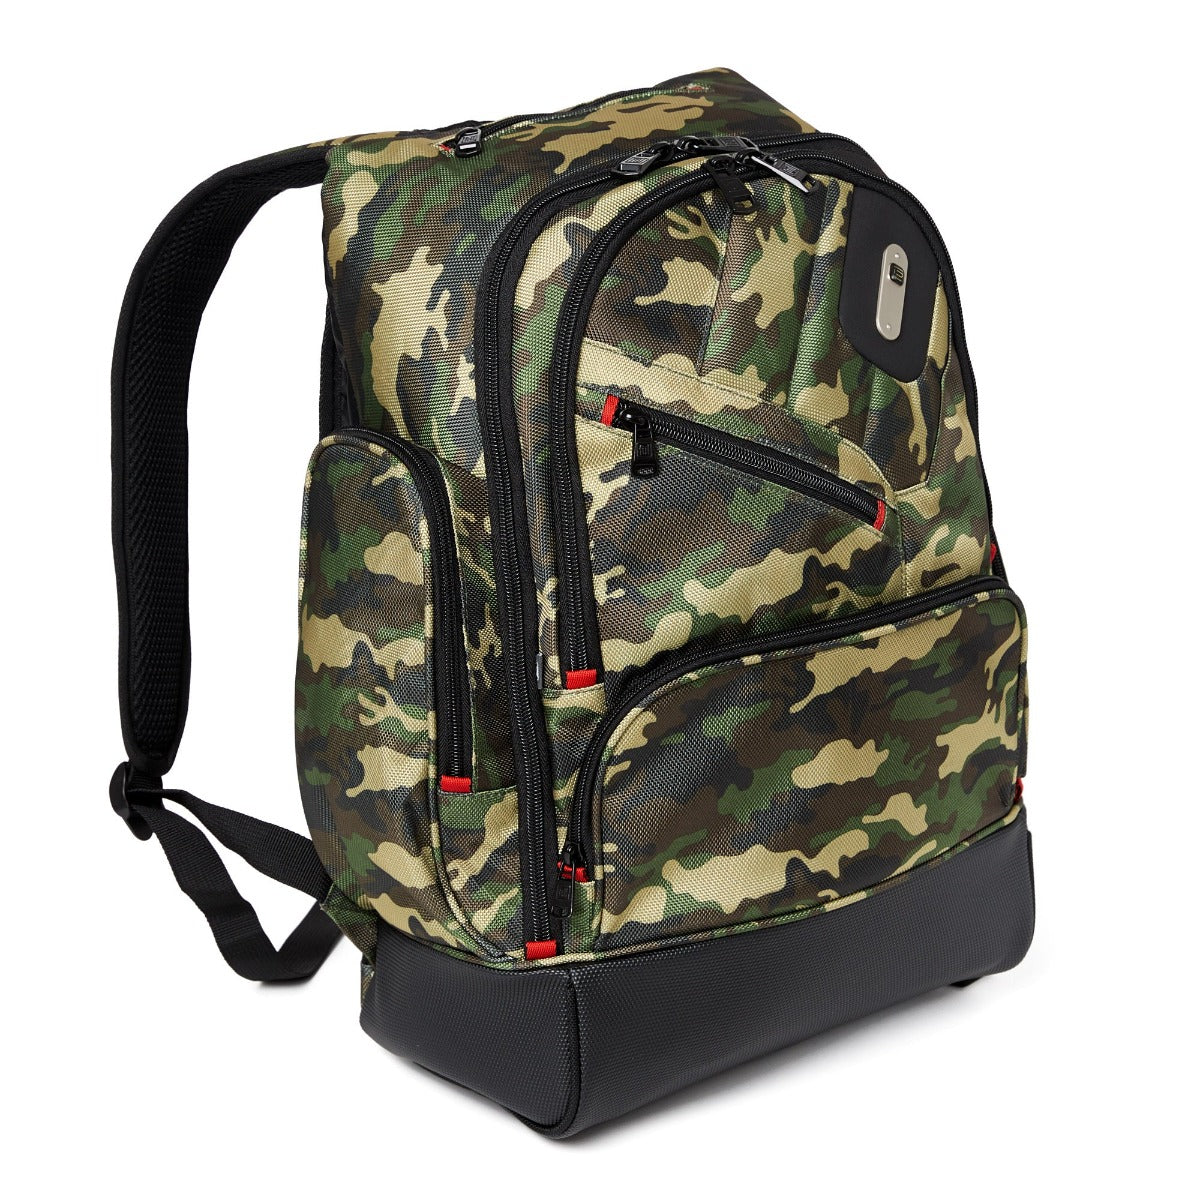 Ful Refugee woodland camouflage camo tech carry-on backpack